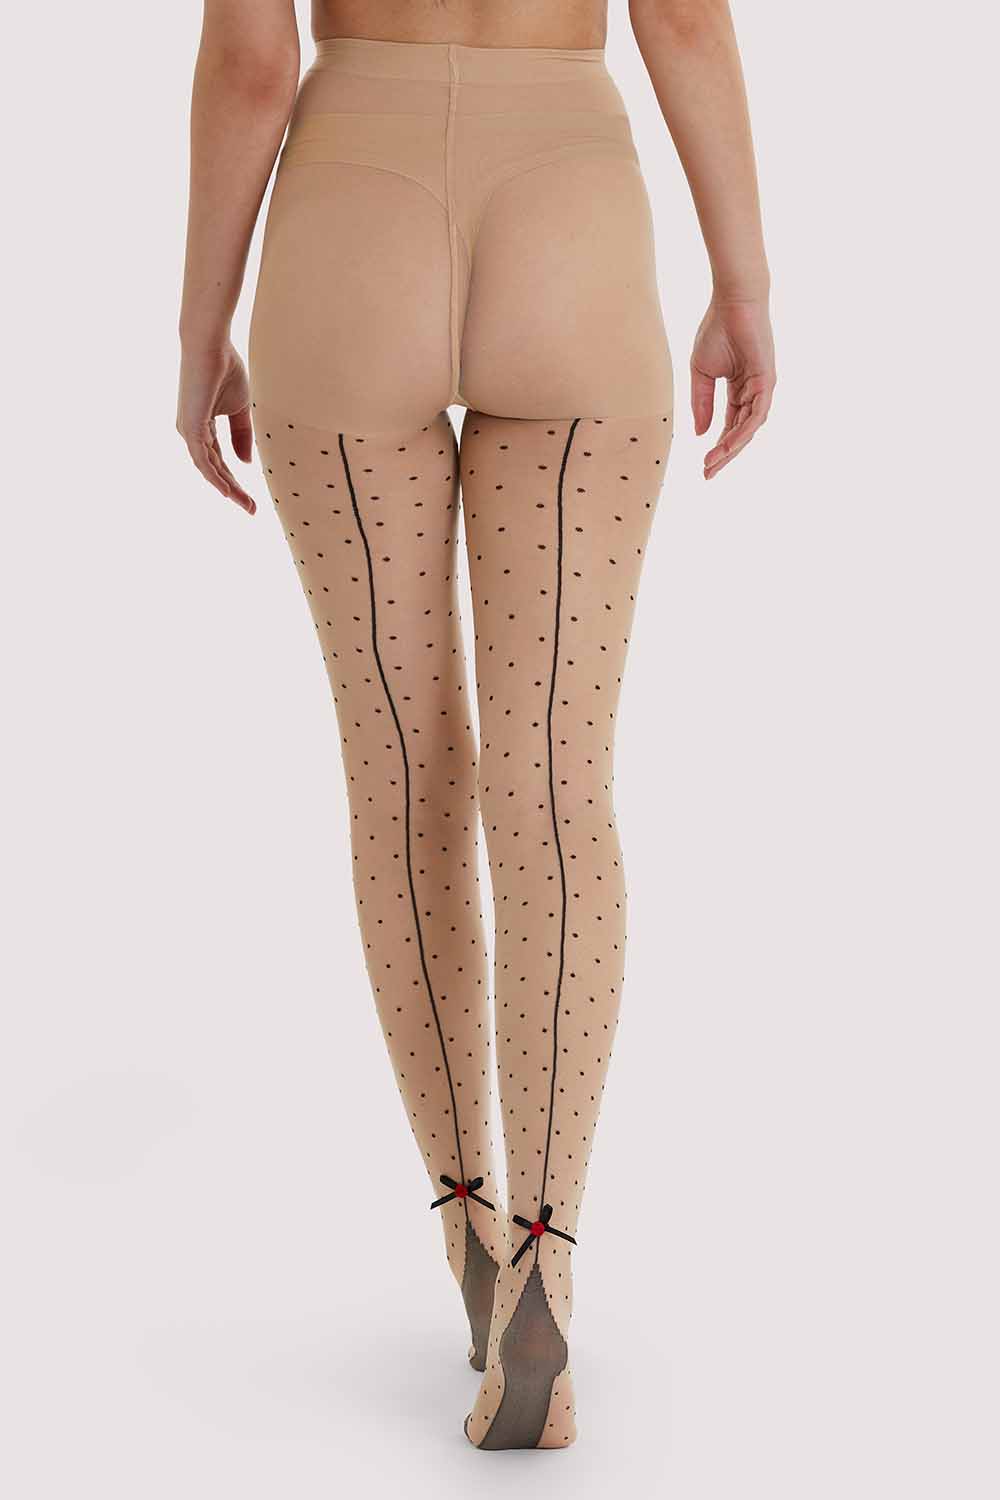 Dotty Seamed Tights With Bow Light Beige/Black – Playful Promises